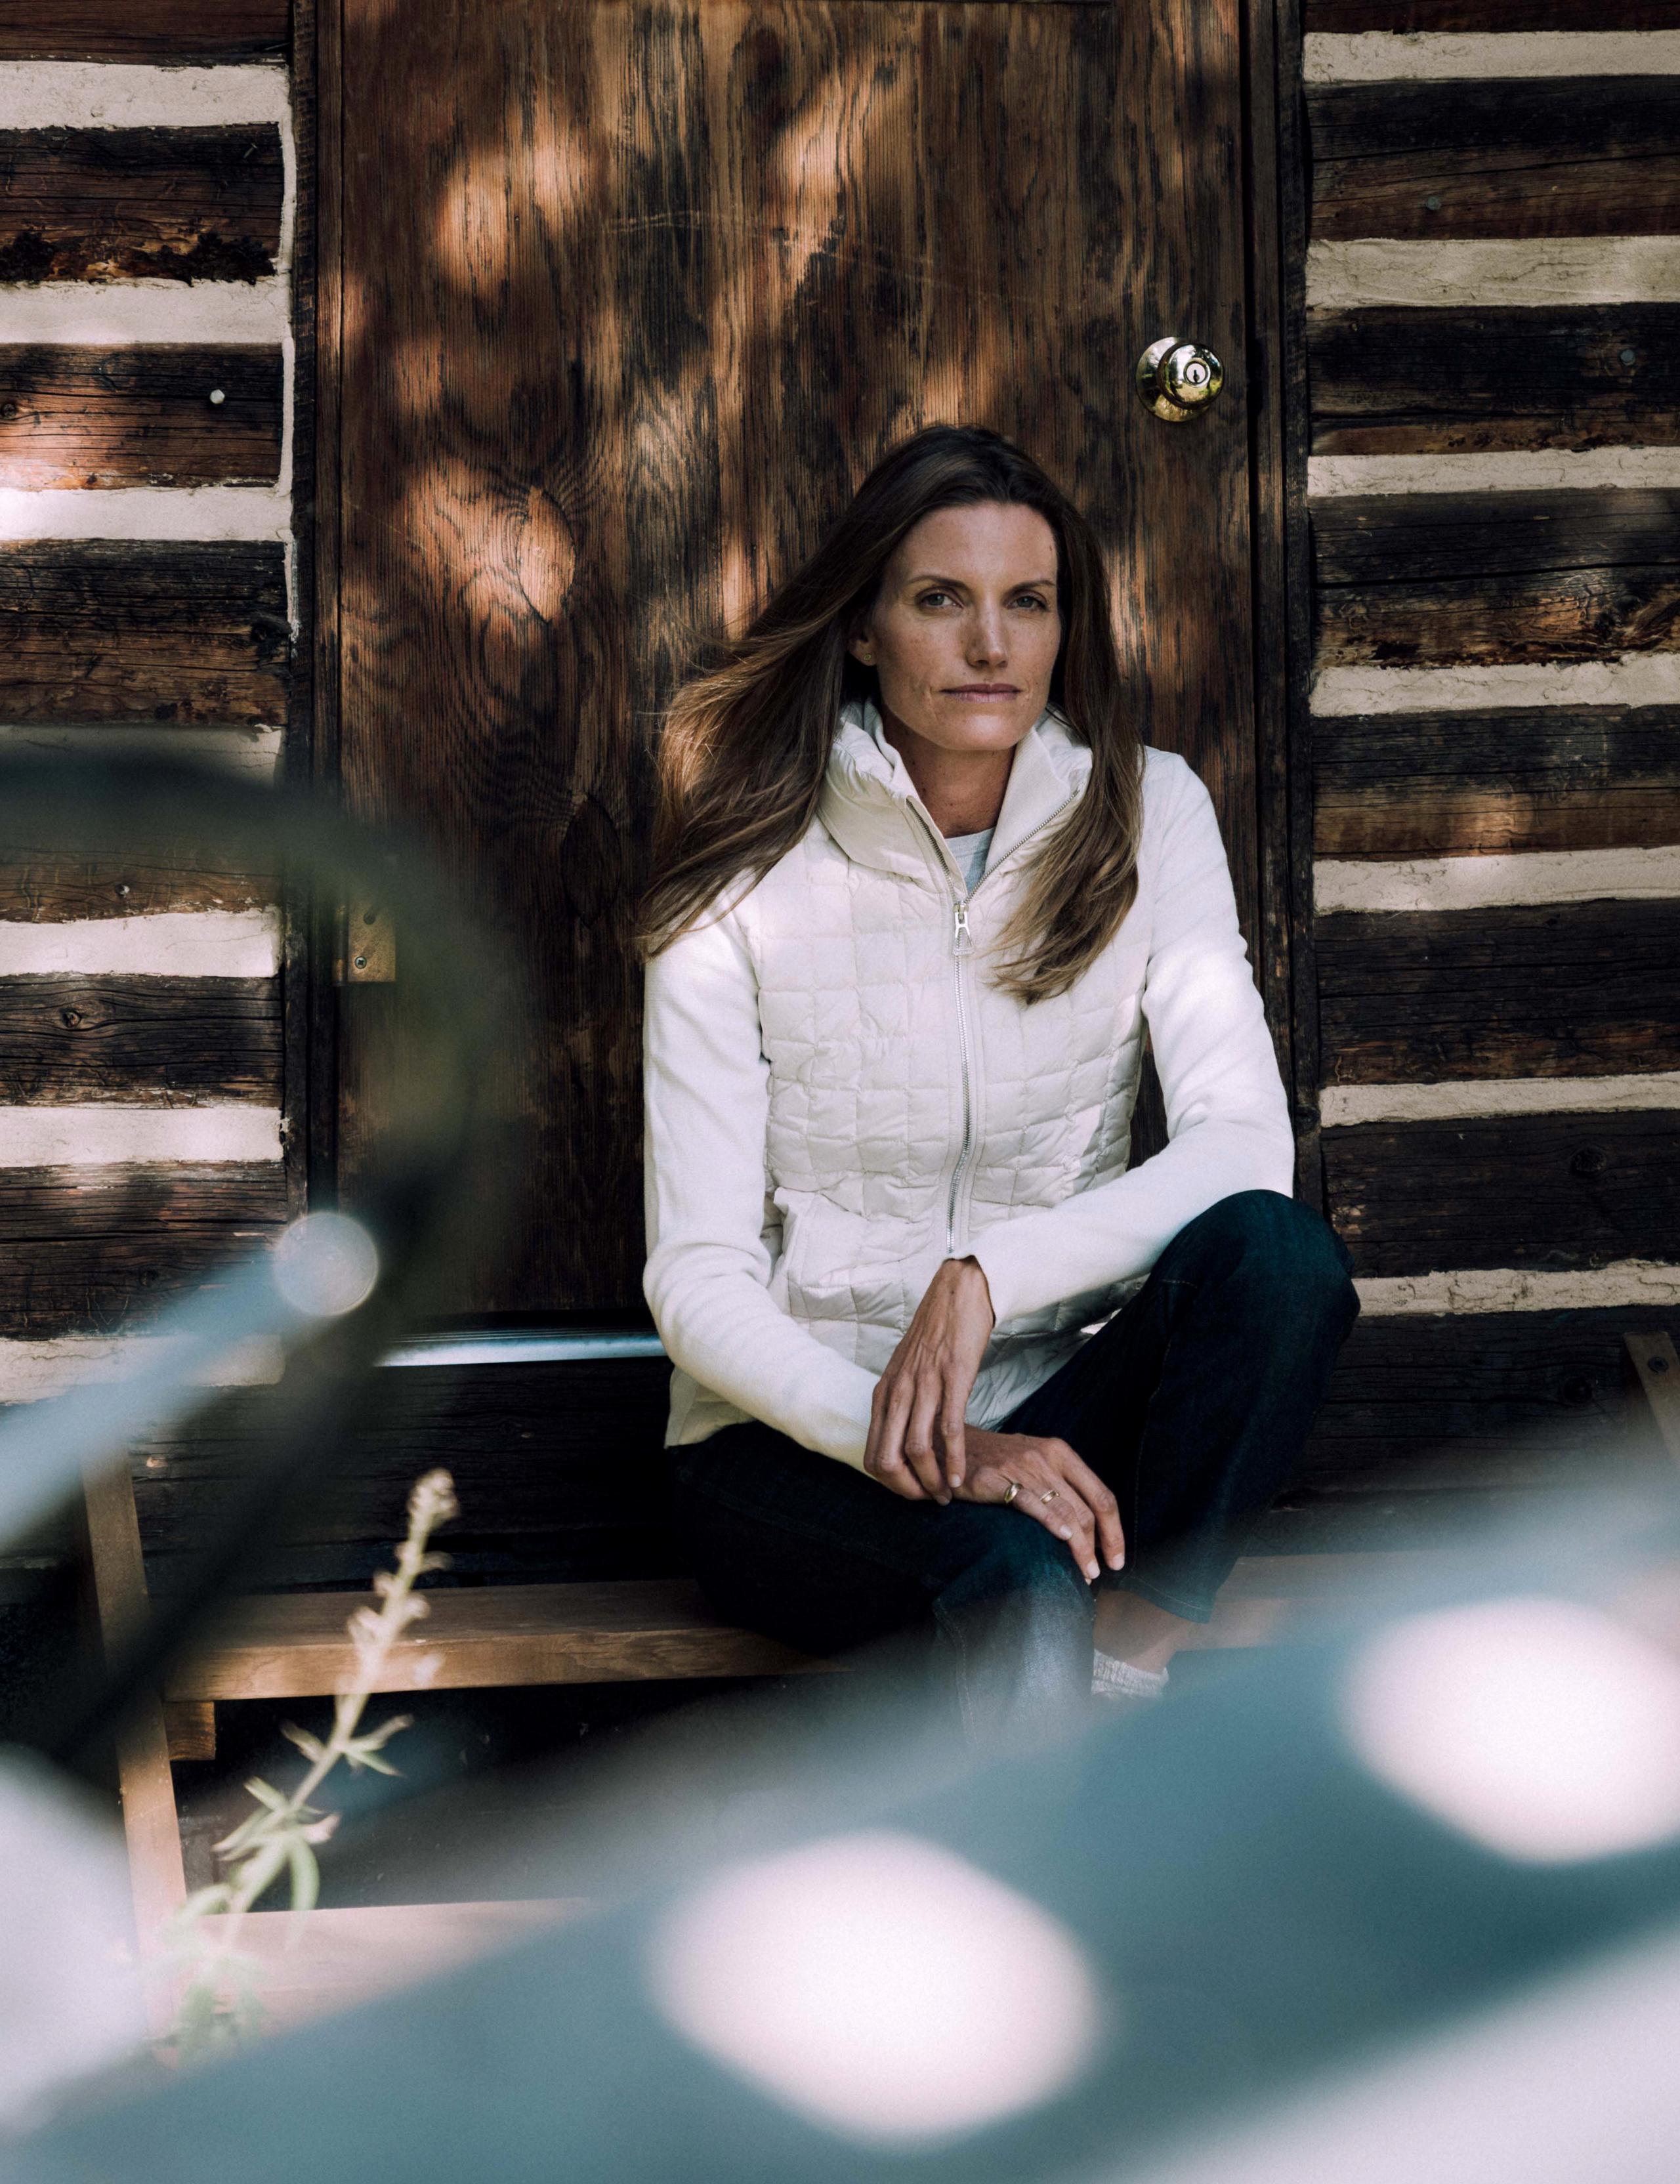 A woman in Phase Full-Zip sitting in front of a cabin.